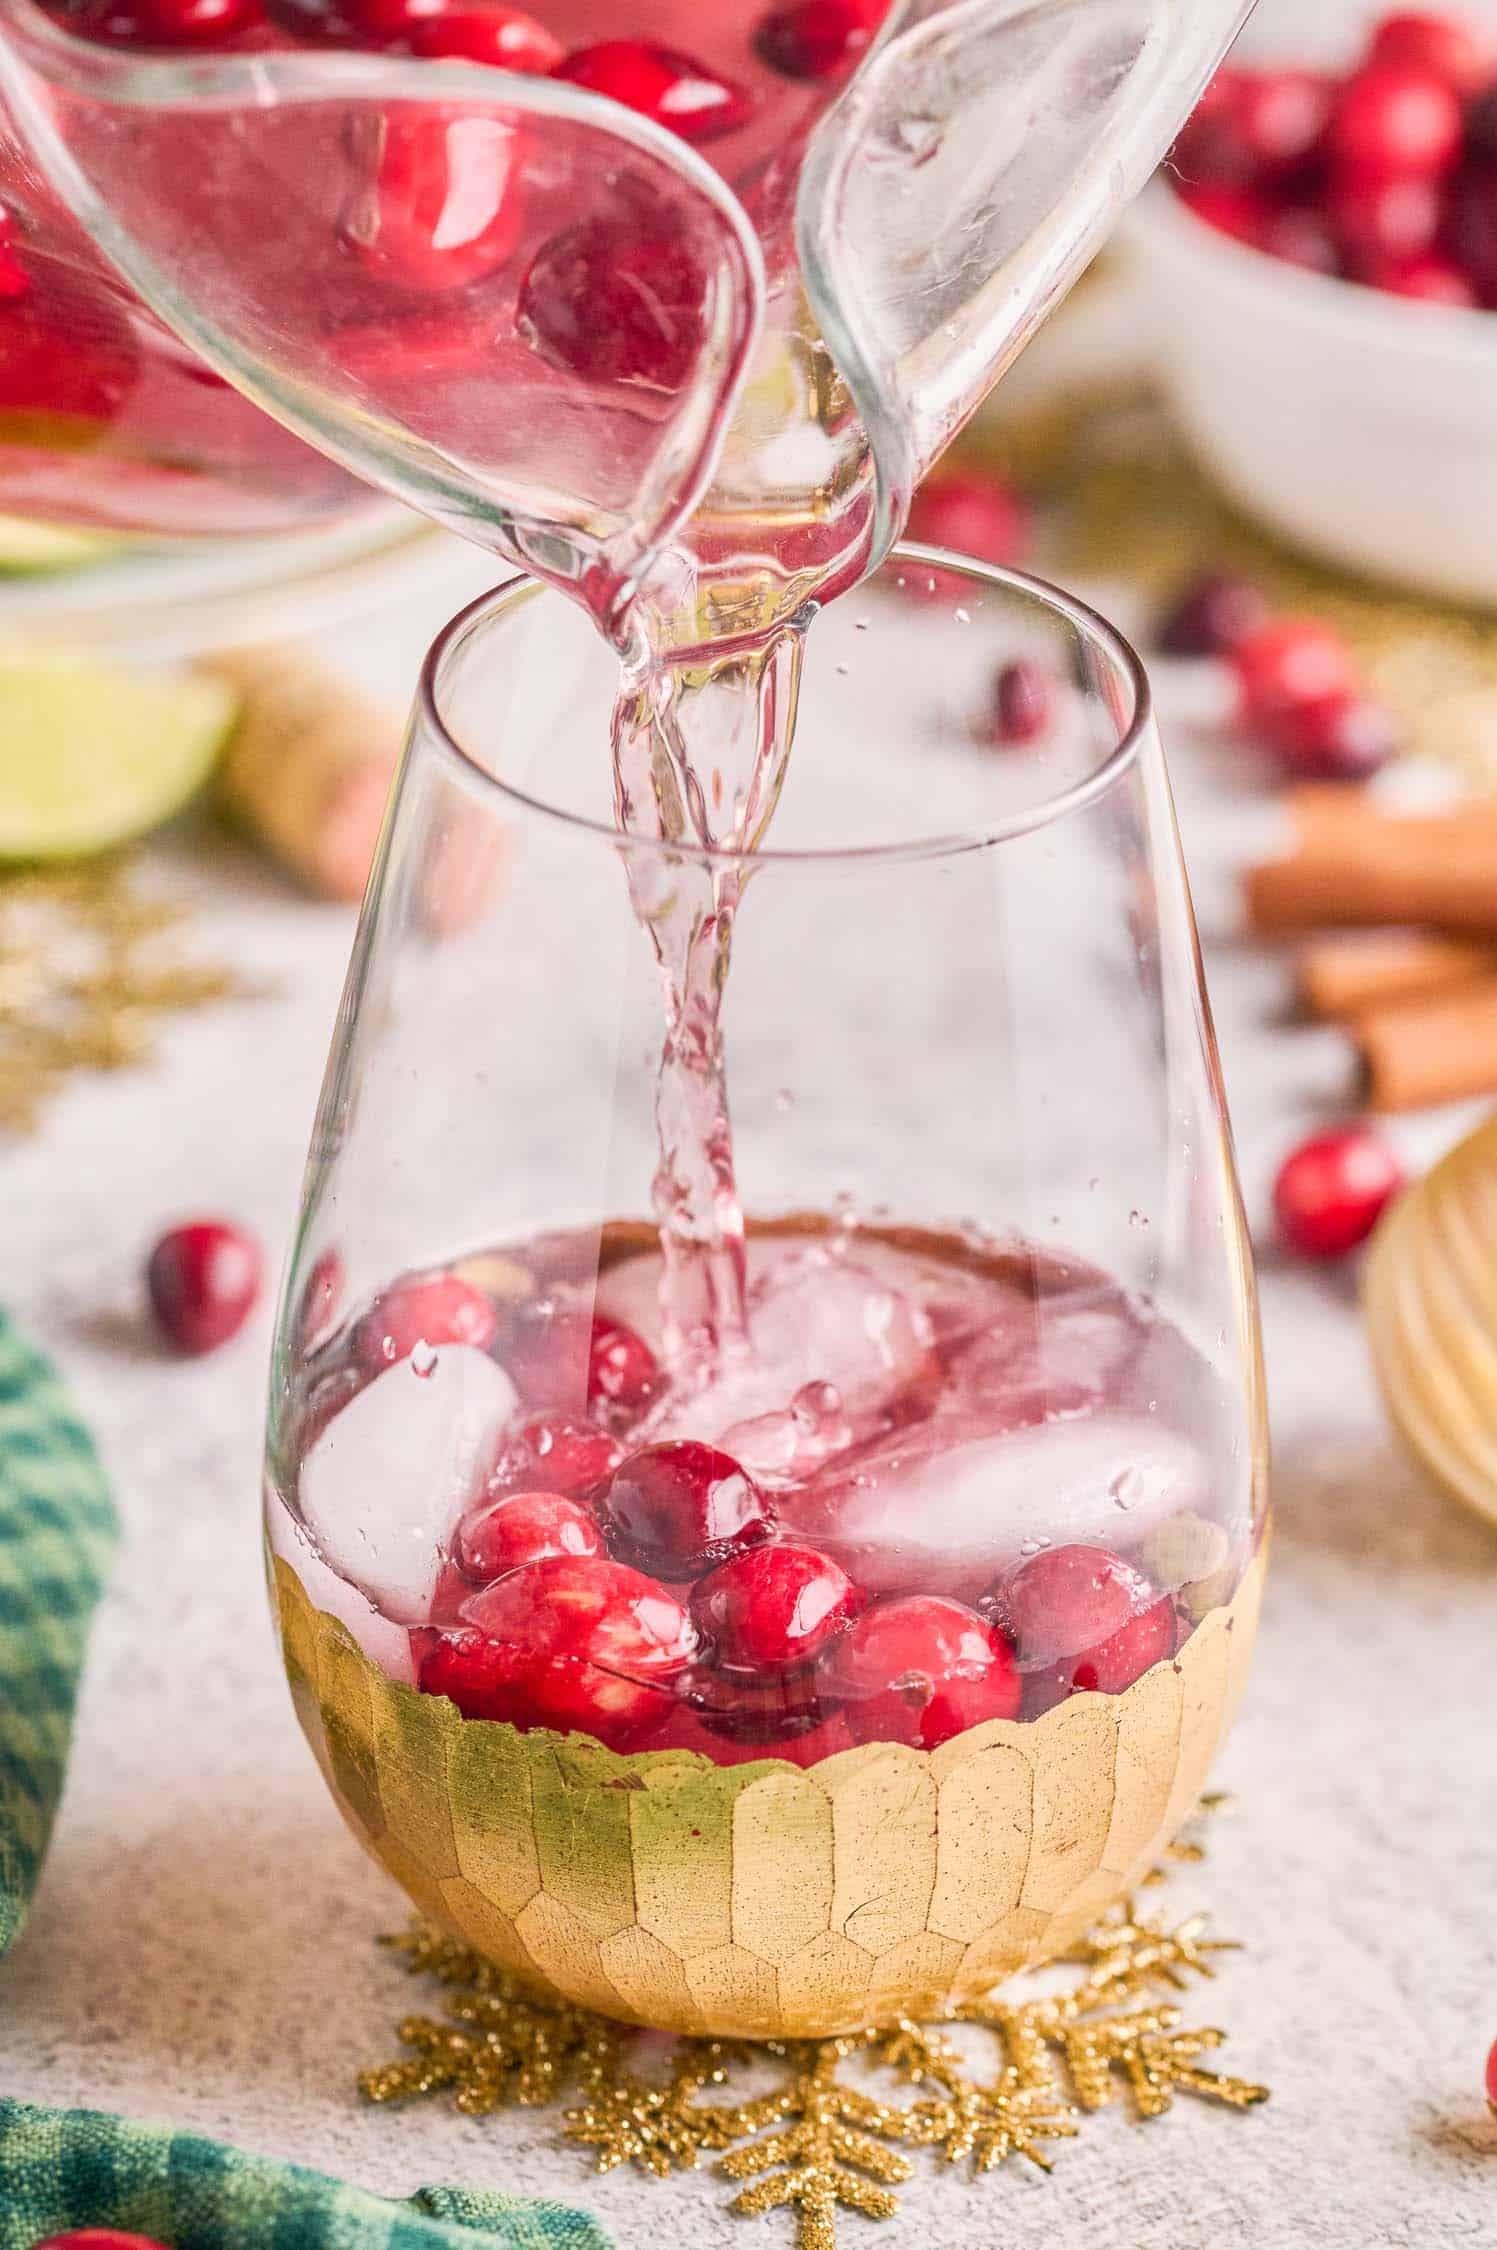 Pouring Spiced Cranberry Wine Spritzer from a glass pitcher into a wine glass